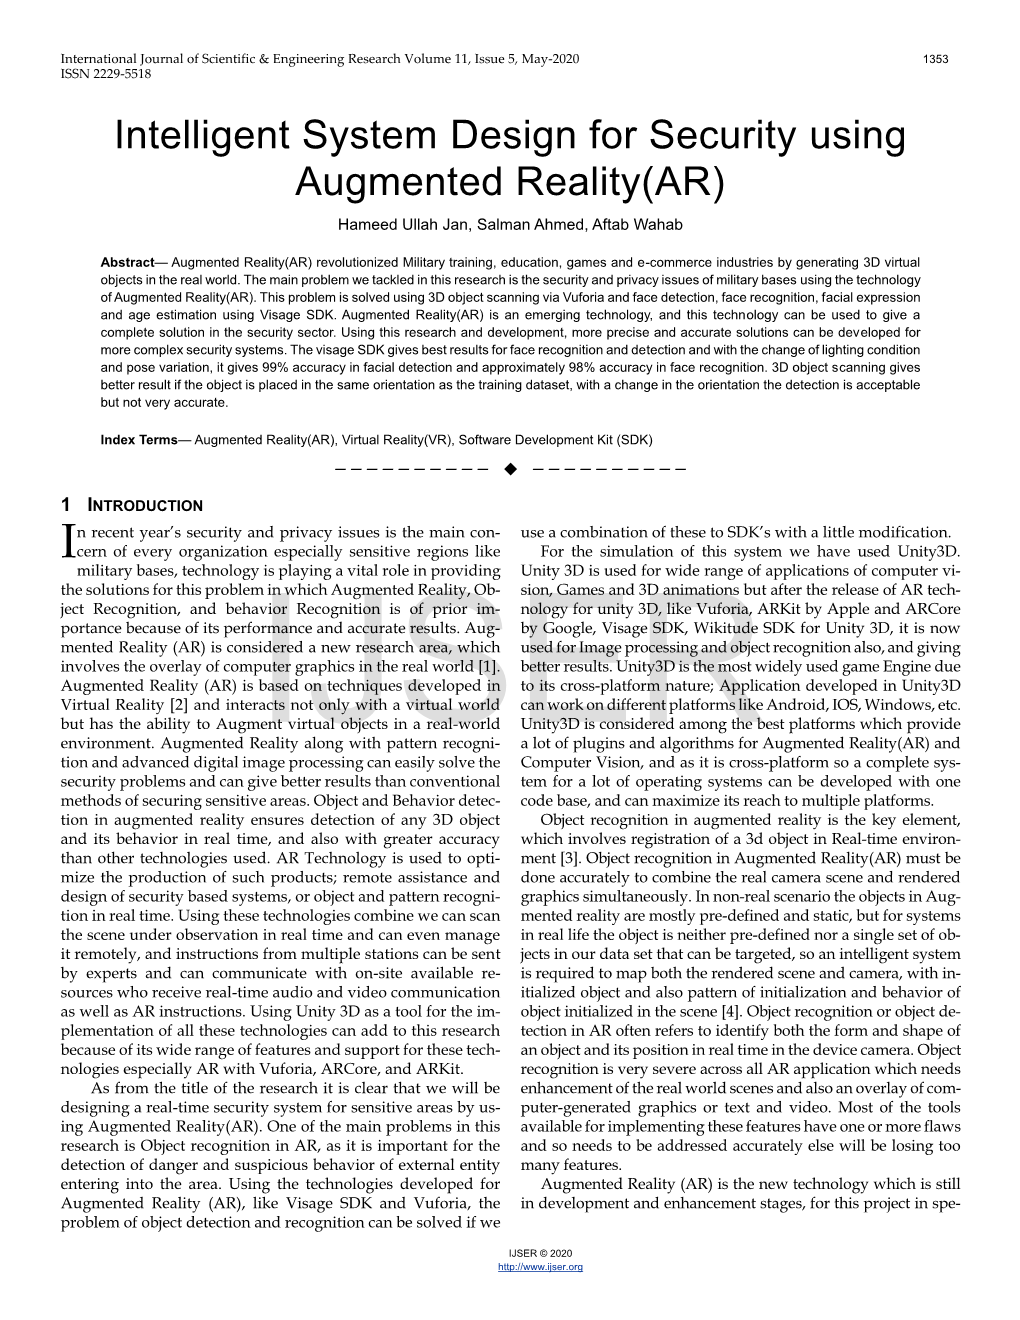 Intelligent System Design for Security Using Augmented Reality(AR) Hameed Ullah Jan, Salman Ahmed, Aftab Wahab